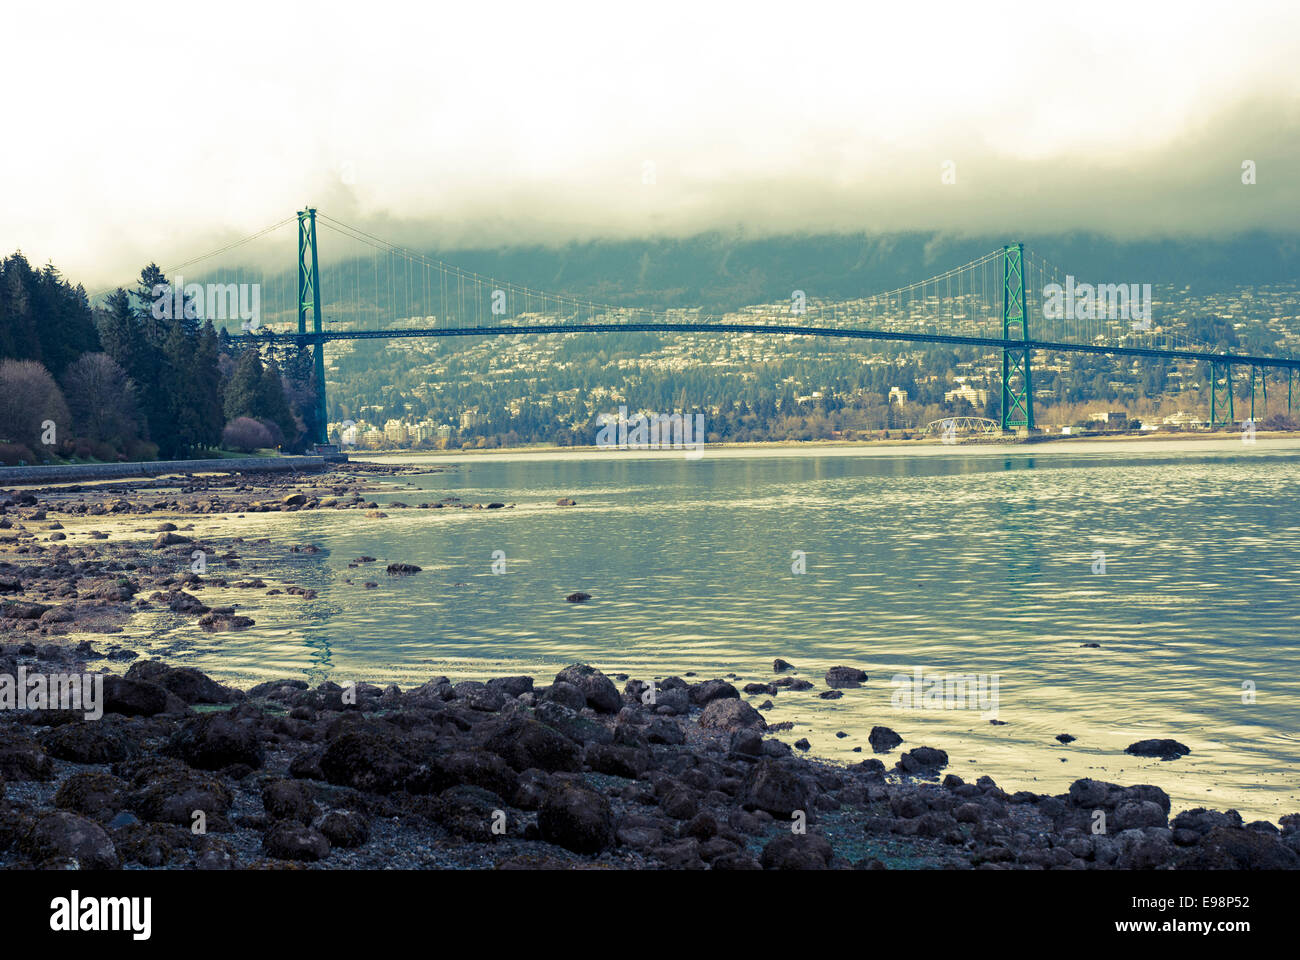 Ponte Lions Gate in Stanley Park, Vancouver, BC Foto Stock